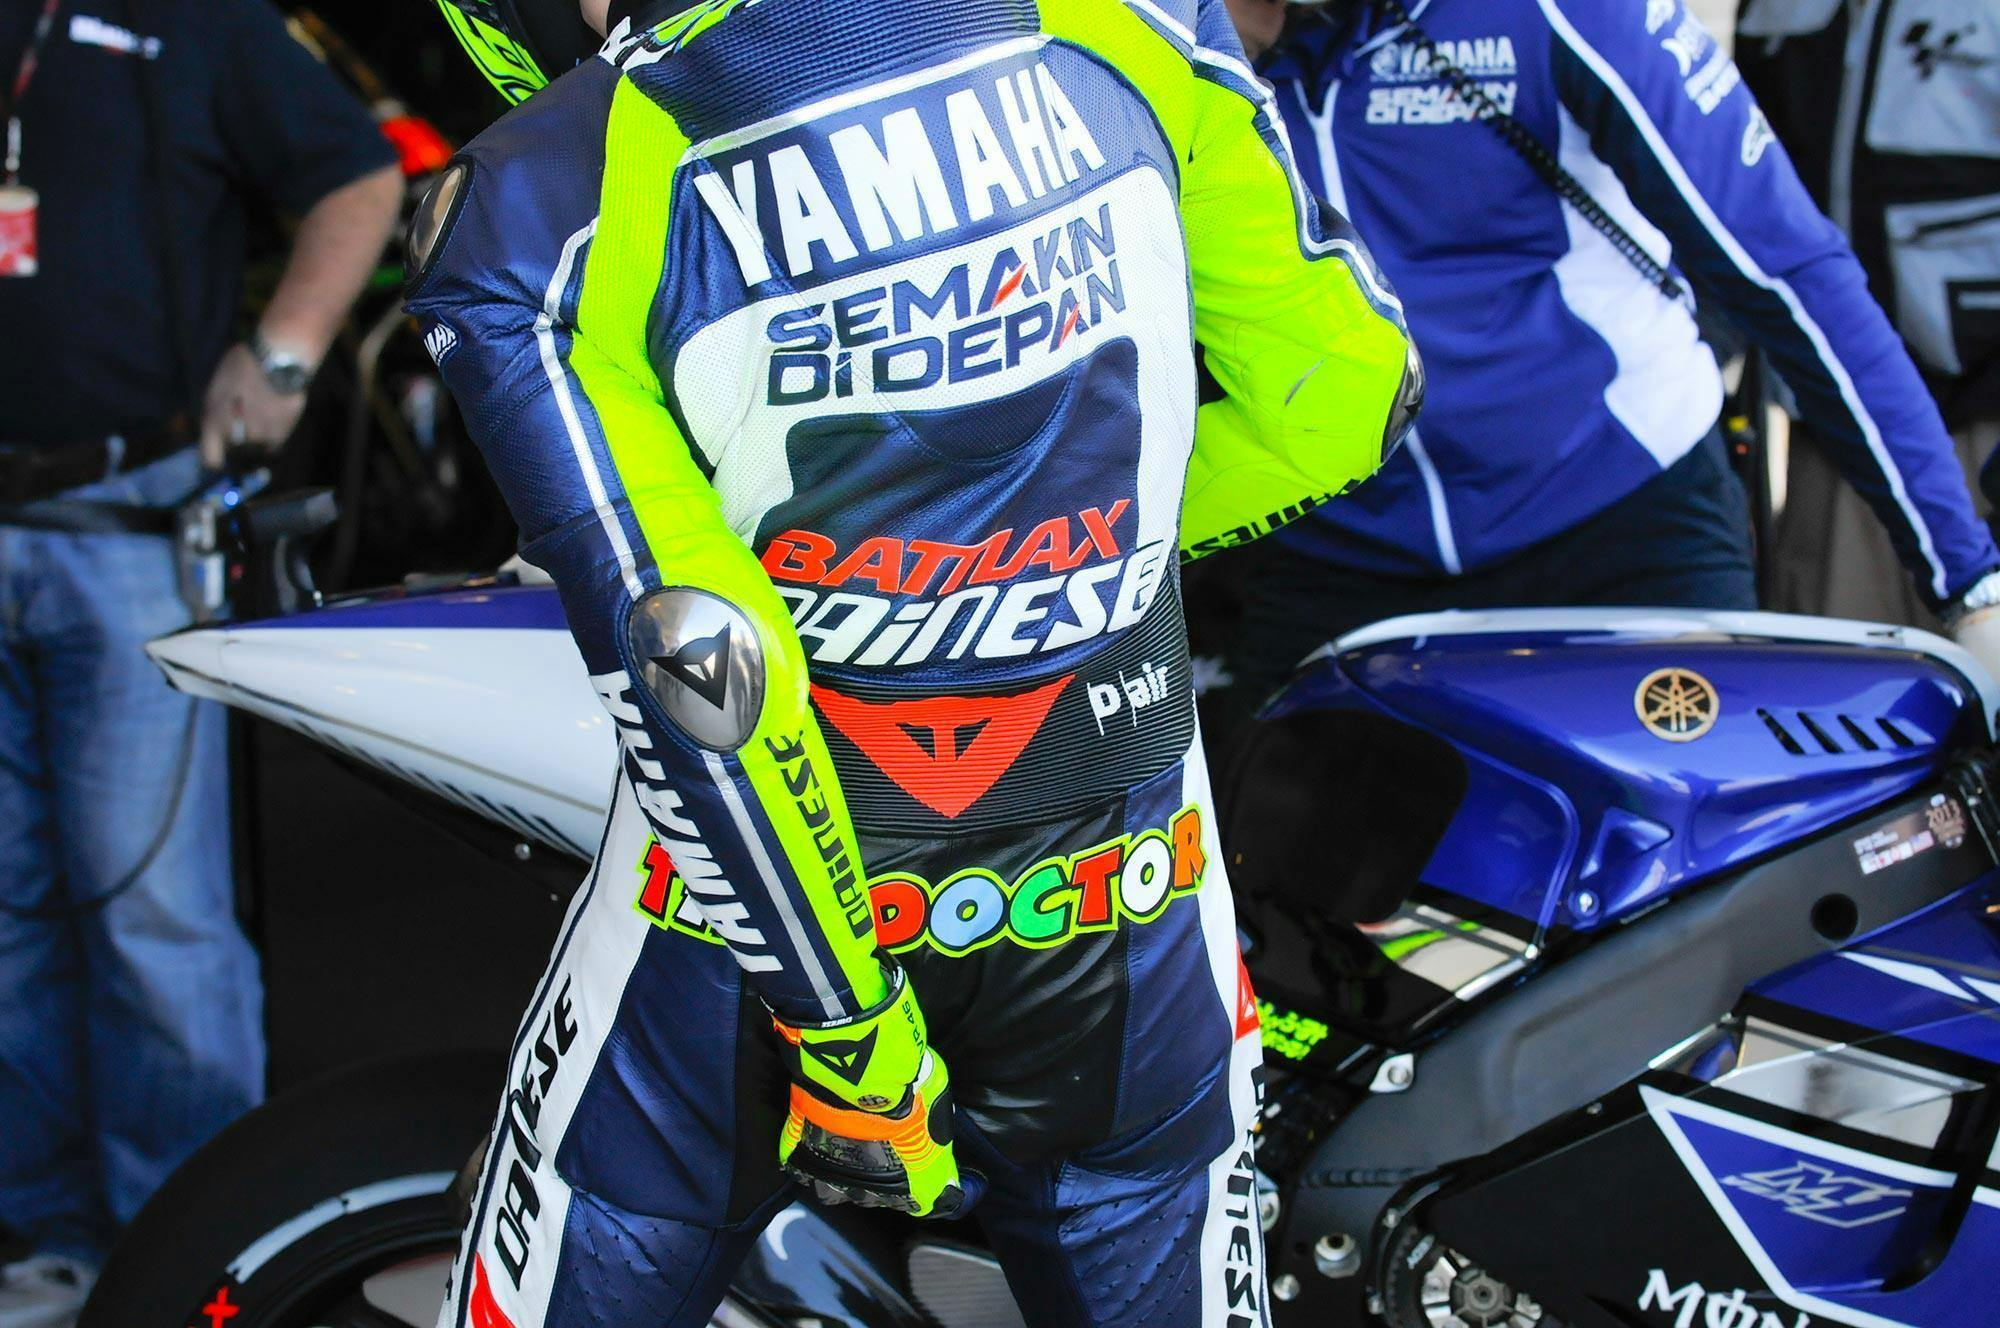 Rossi pulling at his leathers